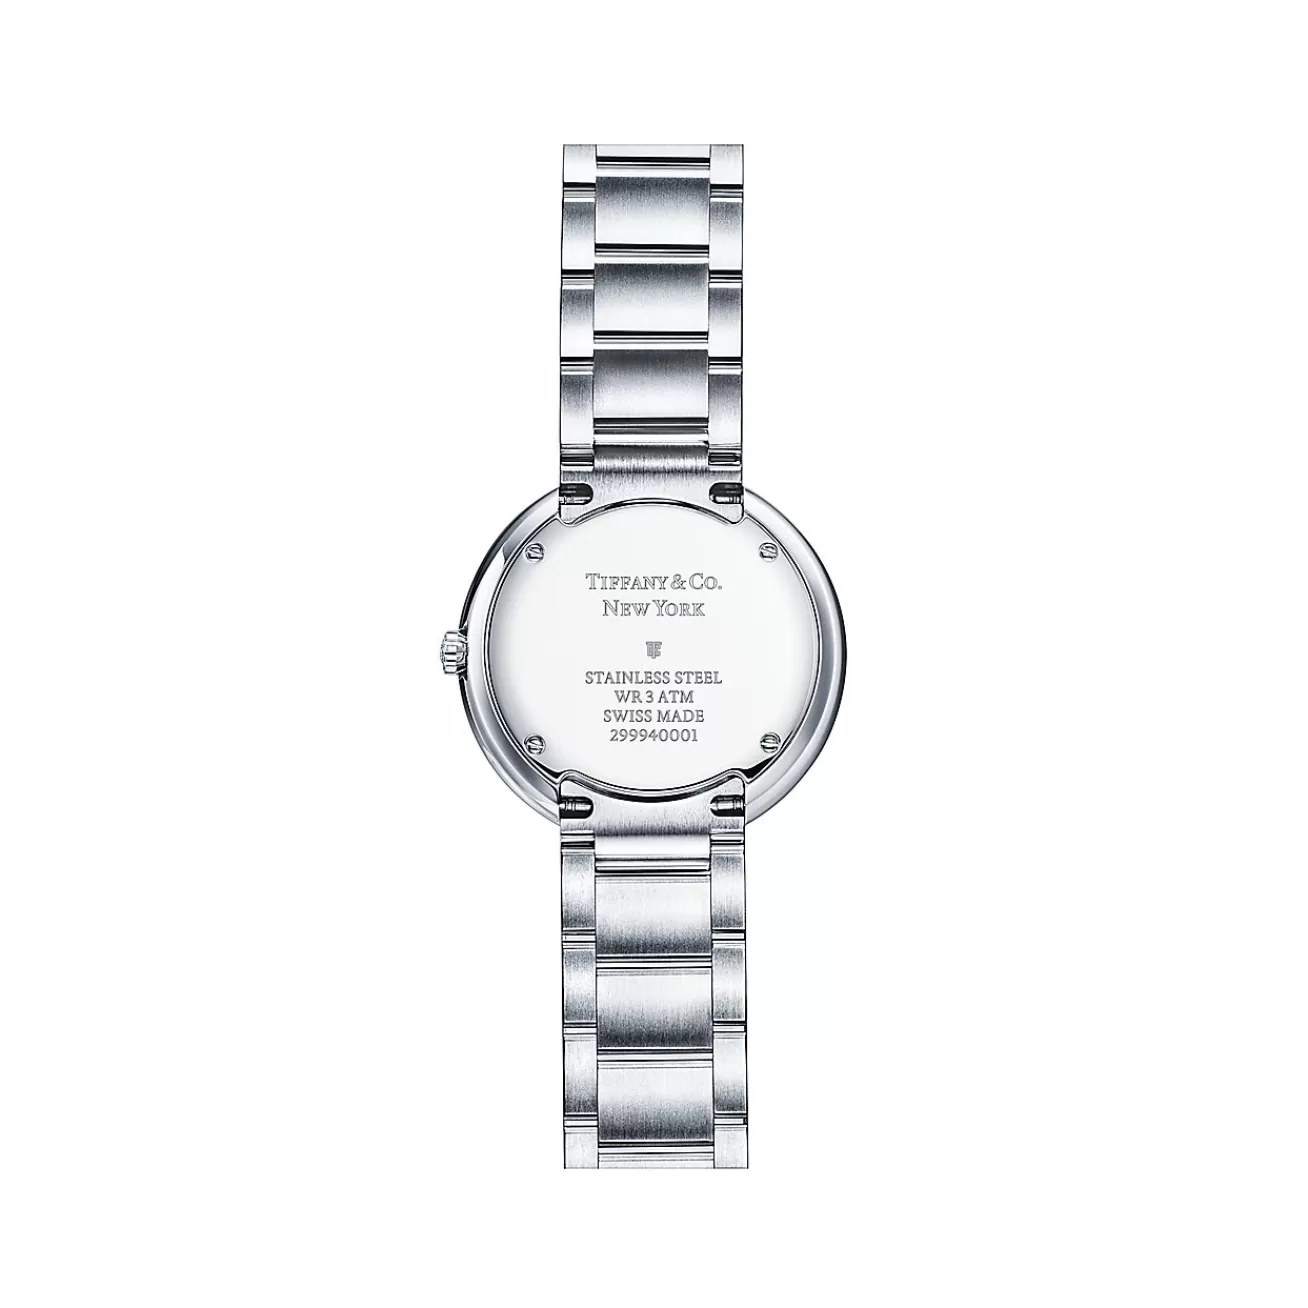 Tiffany & Co. Atlas® 34 mm Watch in Stainless Steel with Diamonds and White Mother-of-pearl | ^Women Fine Watches | Women’s Watches